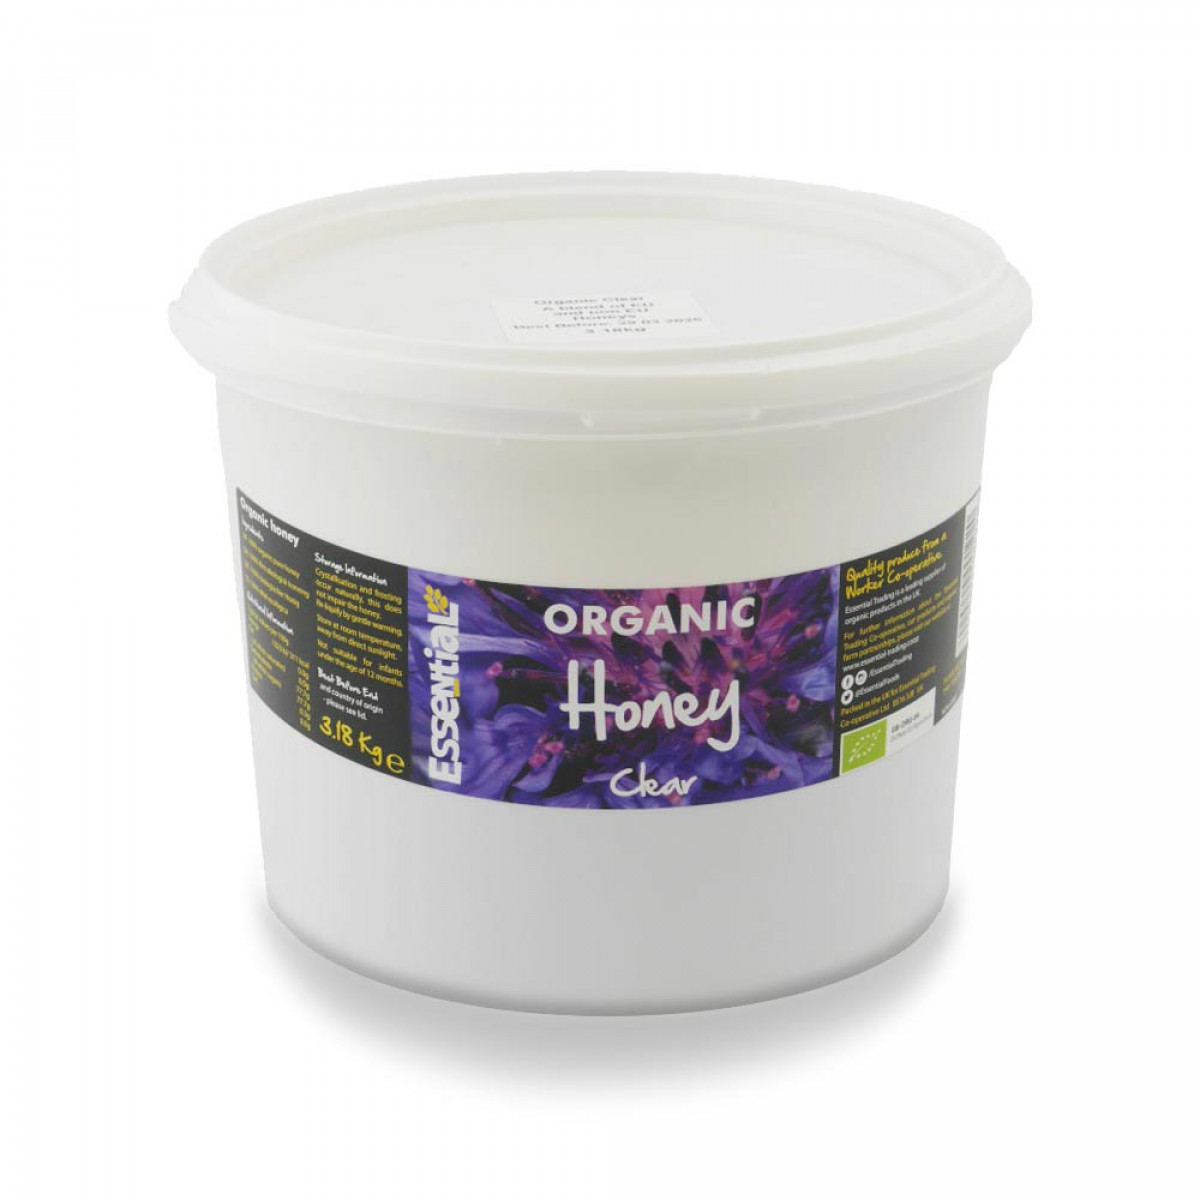 Product picture for Clear Honey